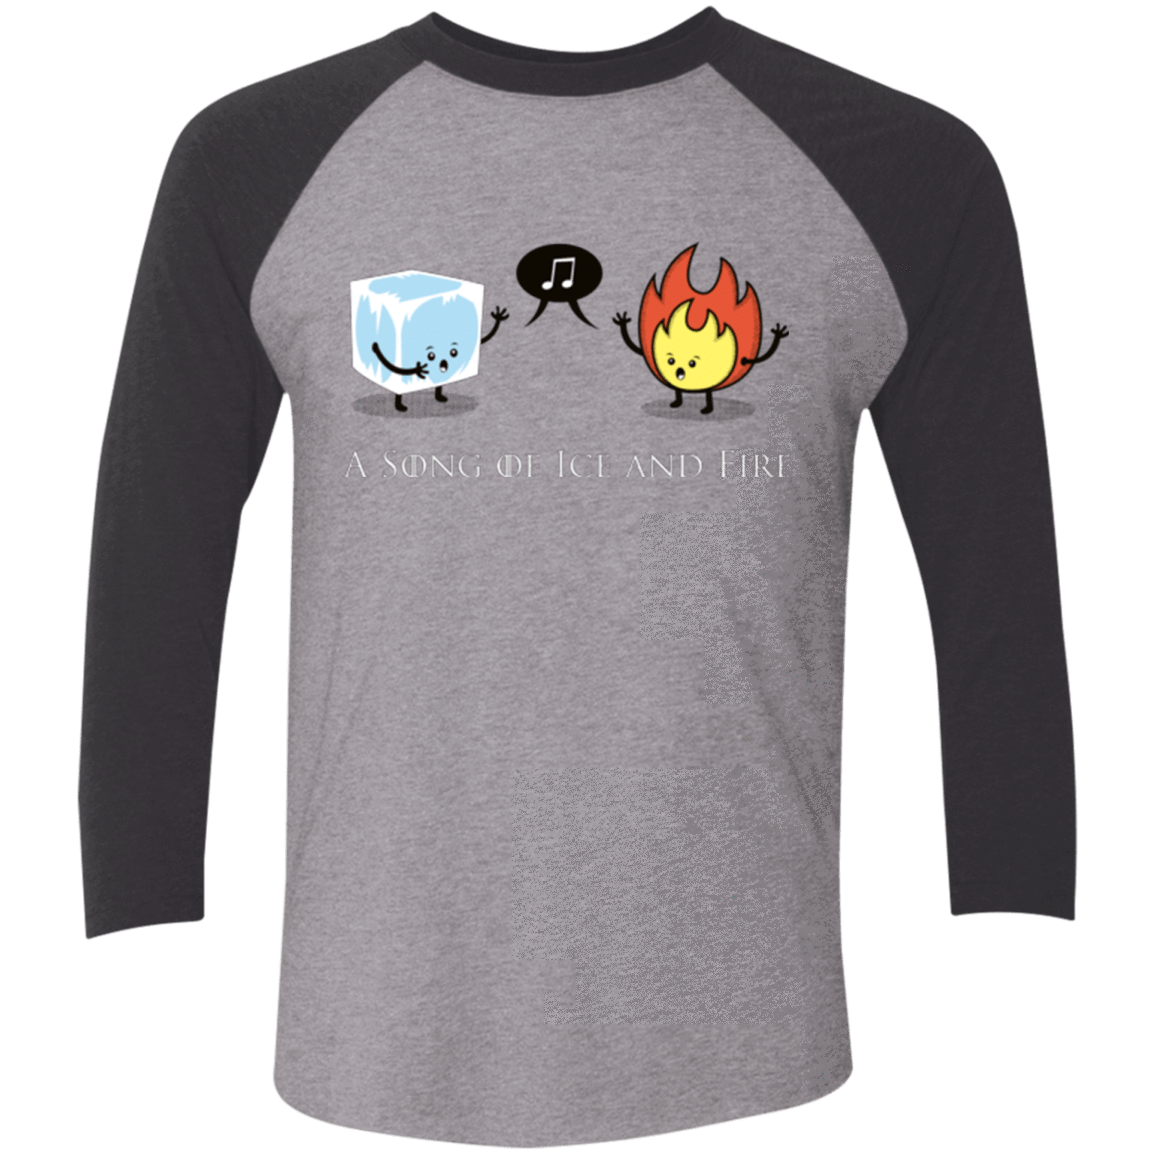 T-Shirts Premium Heather/ Vintage Black / X-Small A Song of Ice and Fire Men's Triblend 3/4 Sleeve